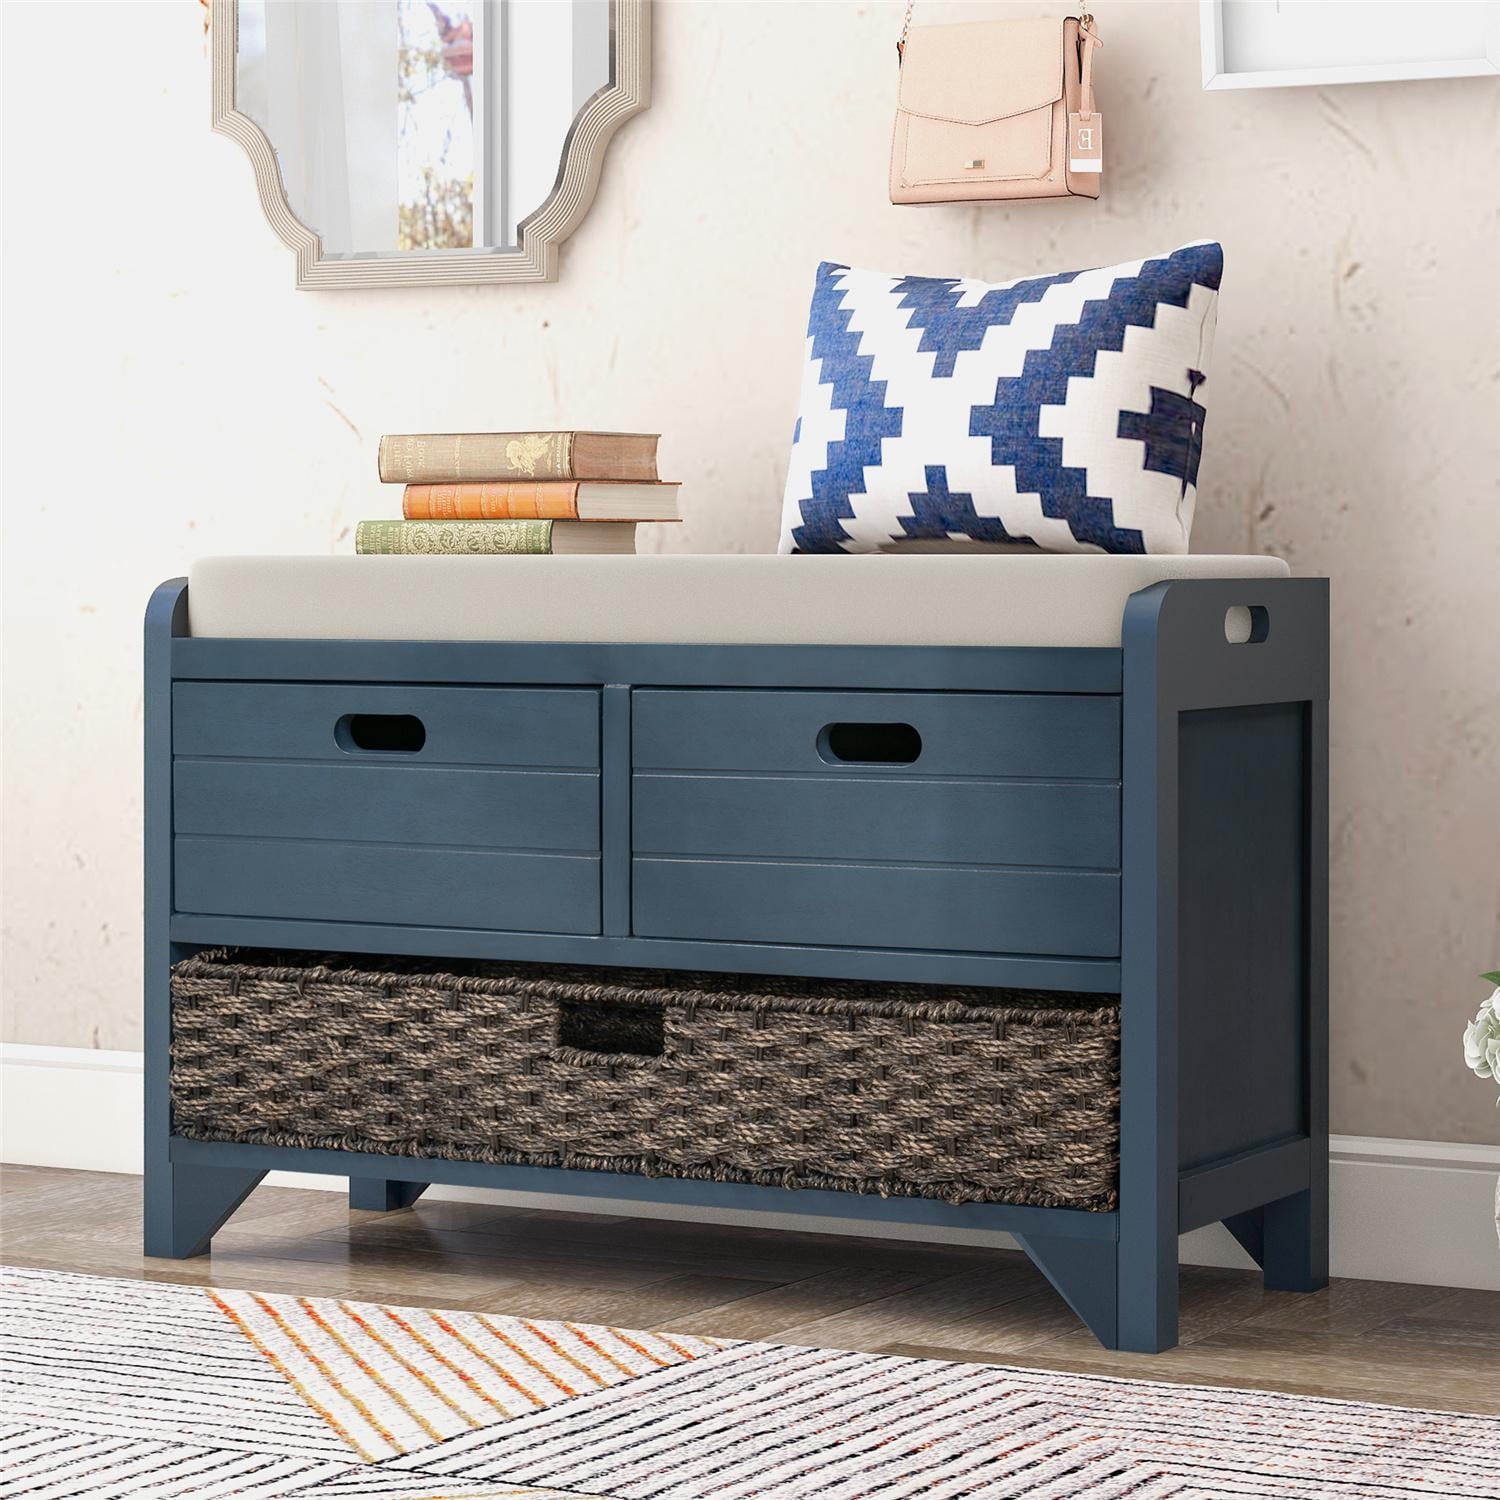 Narrow Storage Bench, Solid Wood Entryway Bench with Removable Basket